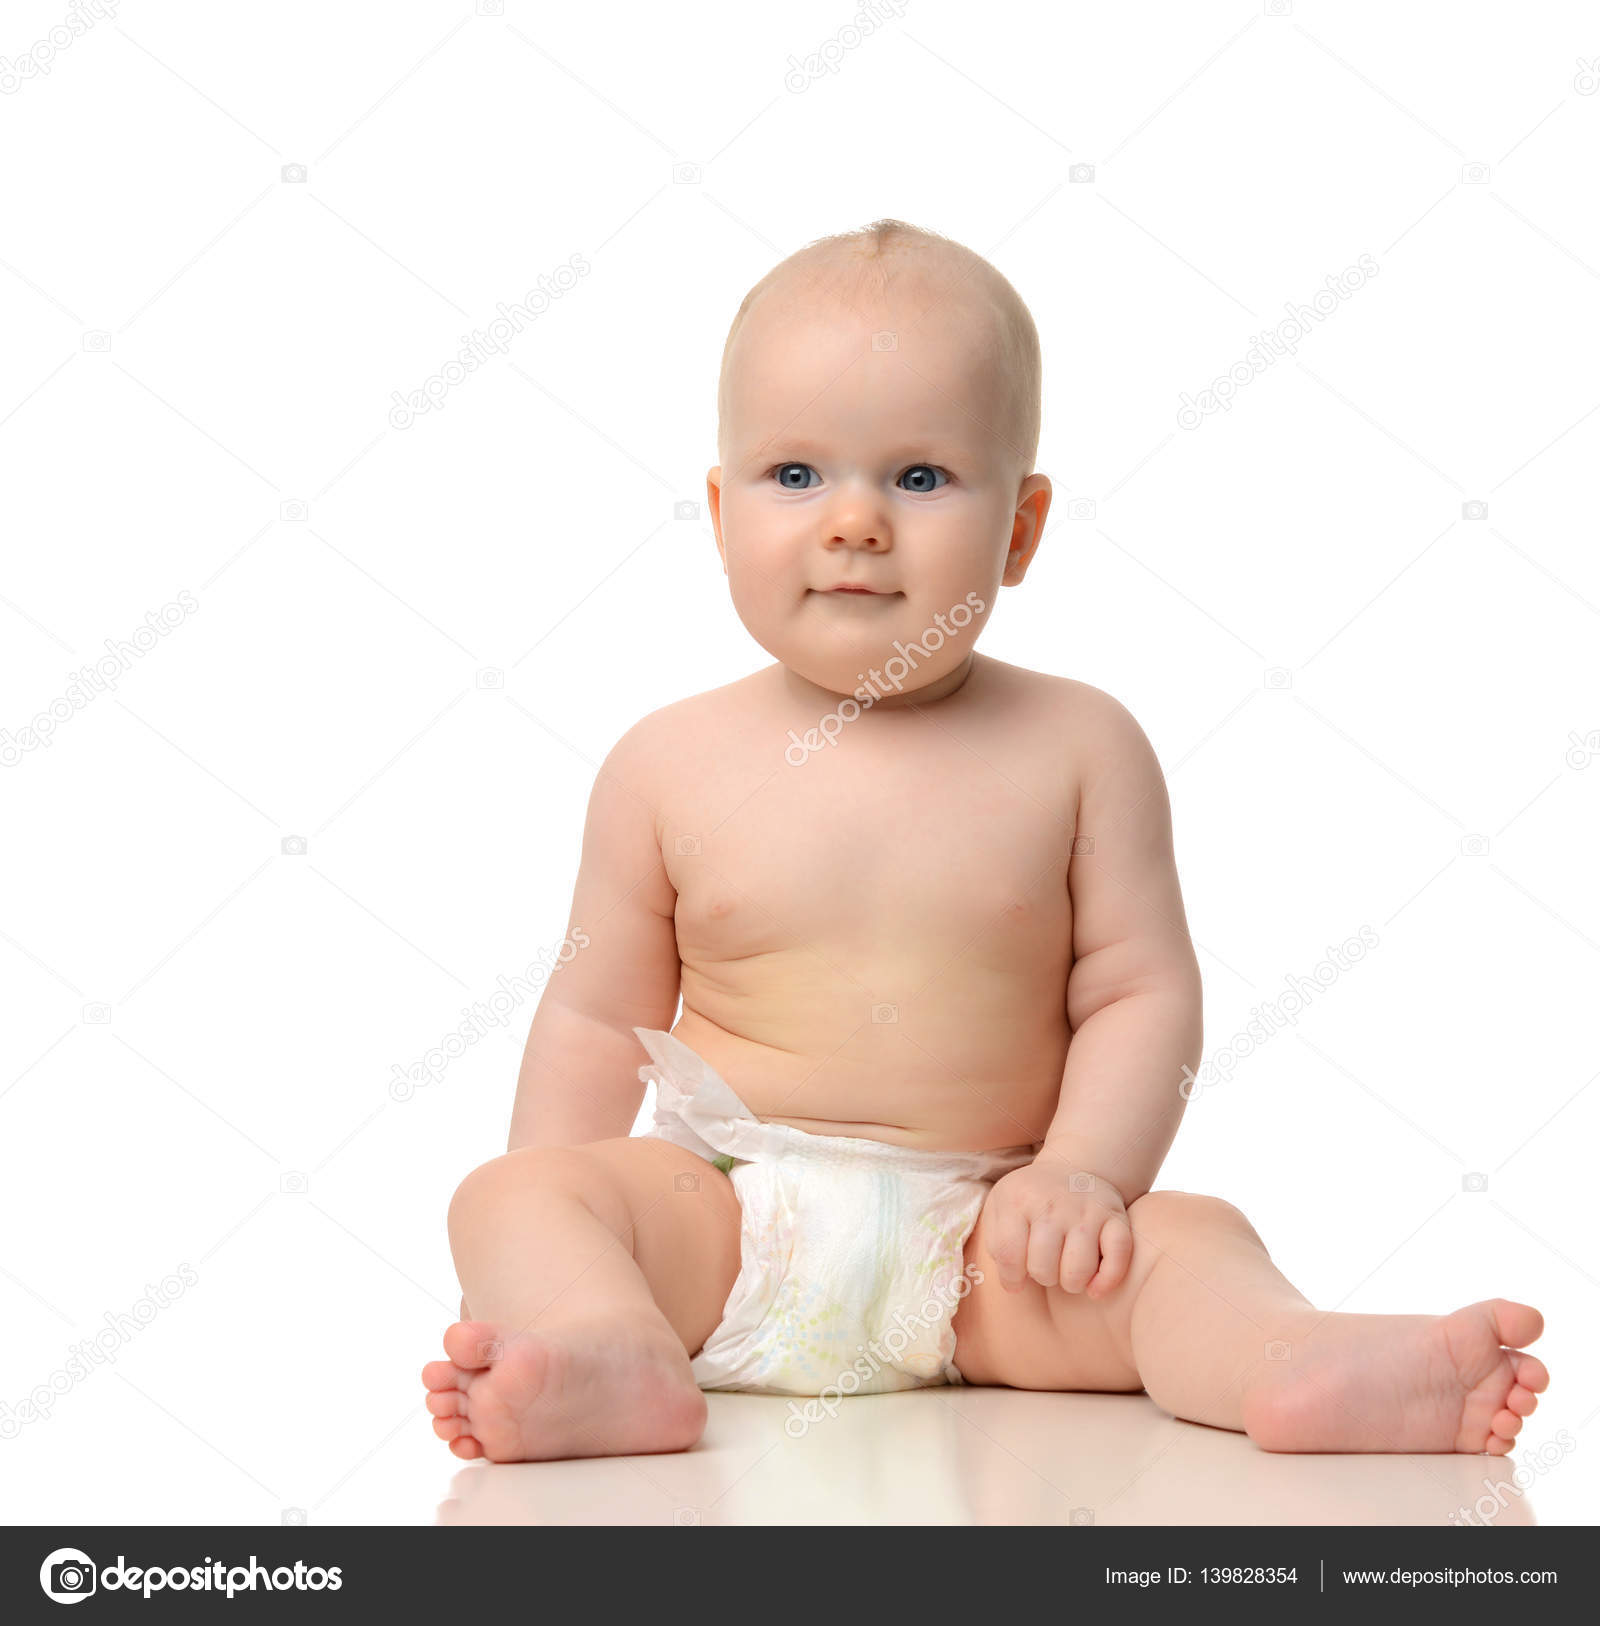 Infant child baby girl toddler sitting naked in diaper looking a ...